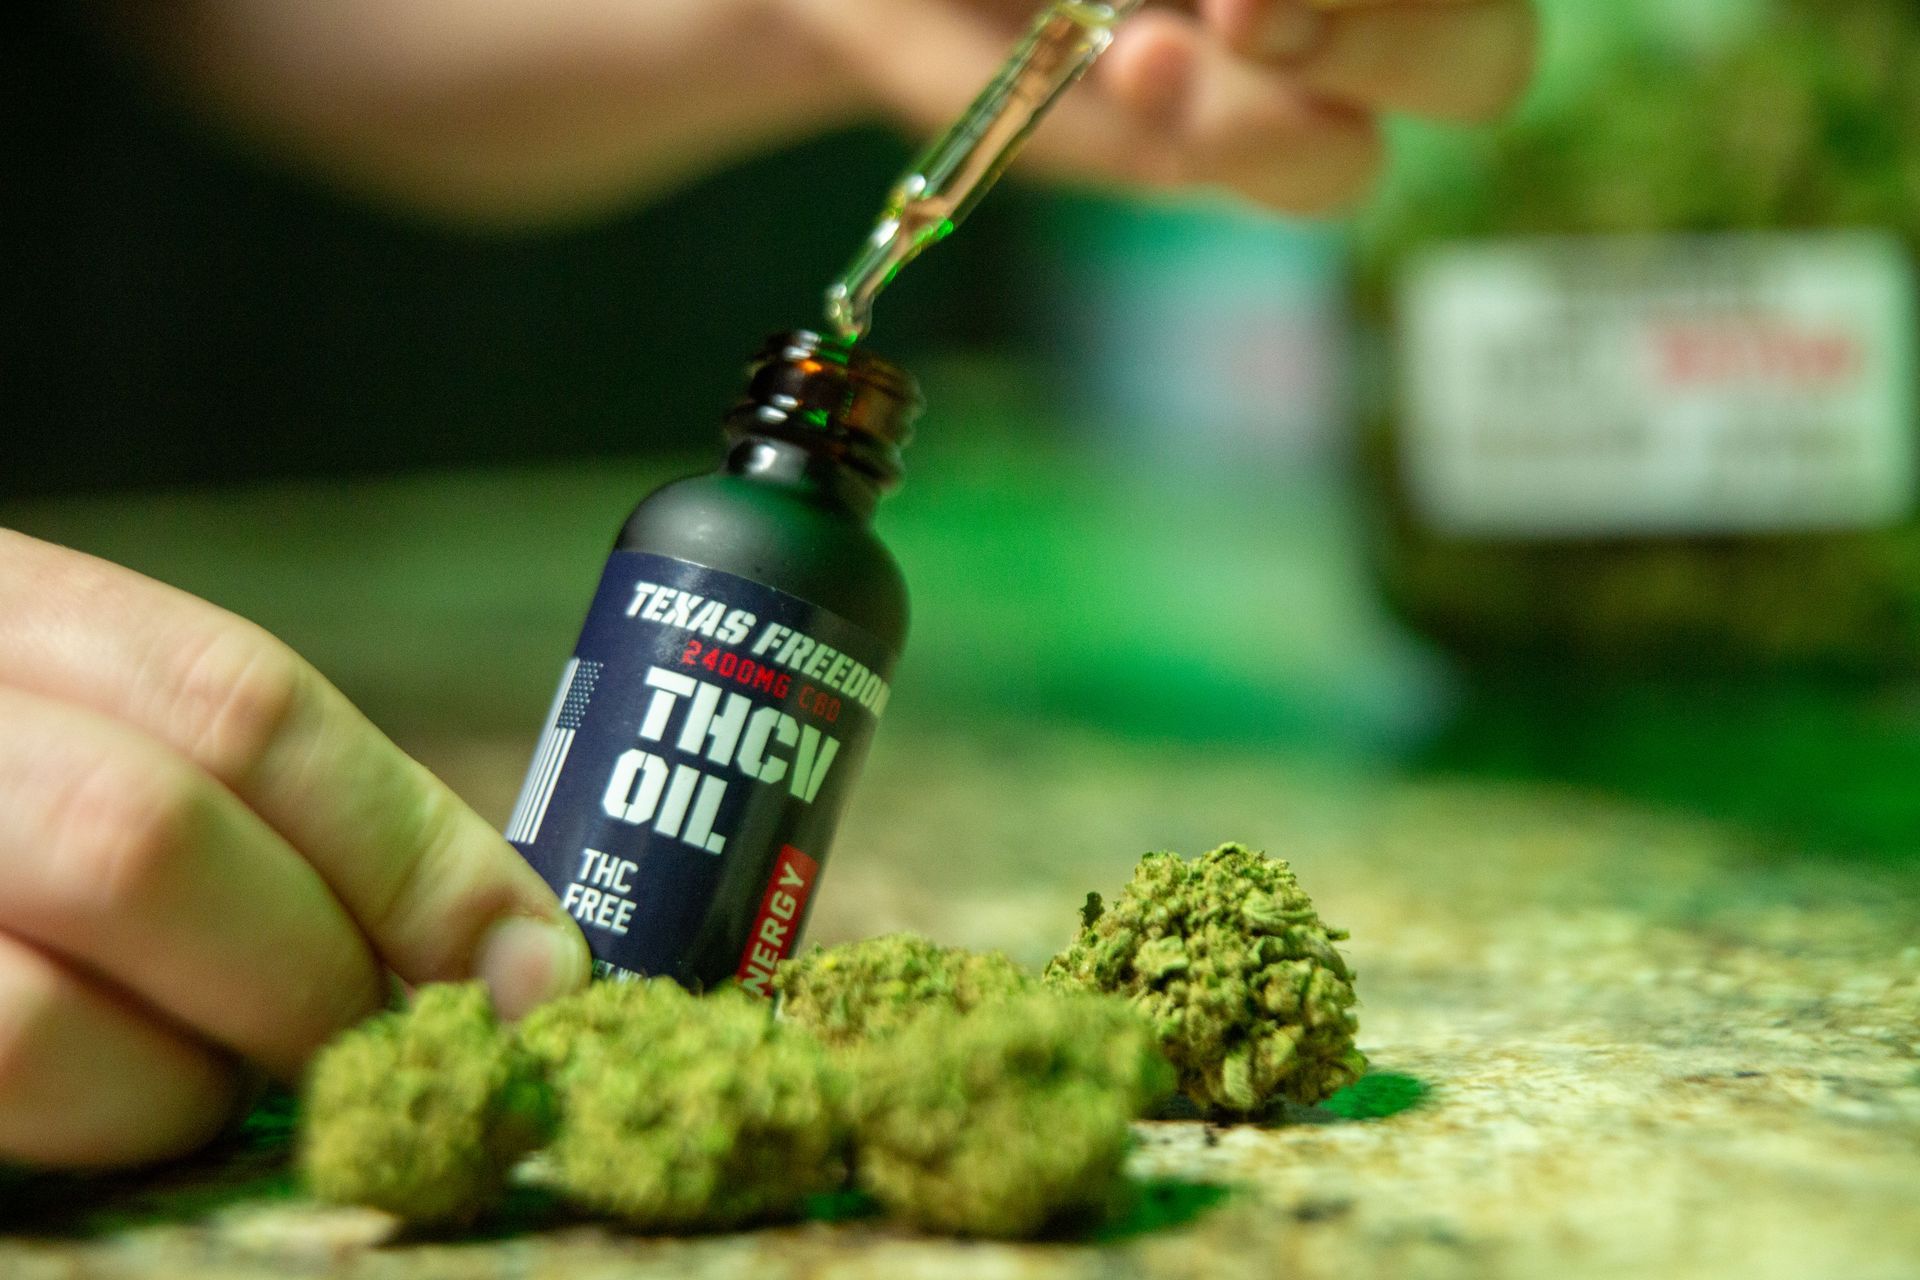 Getting some oil out of a bottle of THCv Oil from Texas Freedom CBD